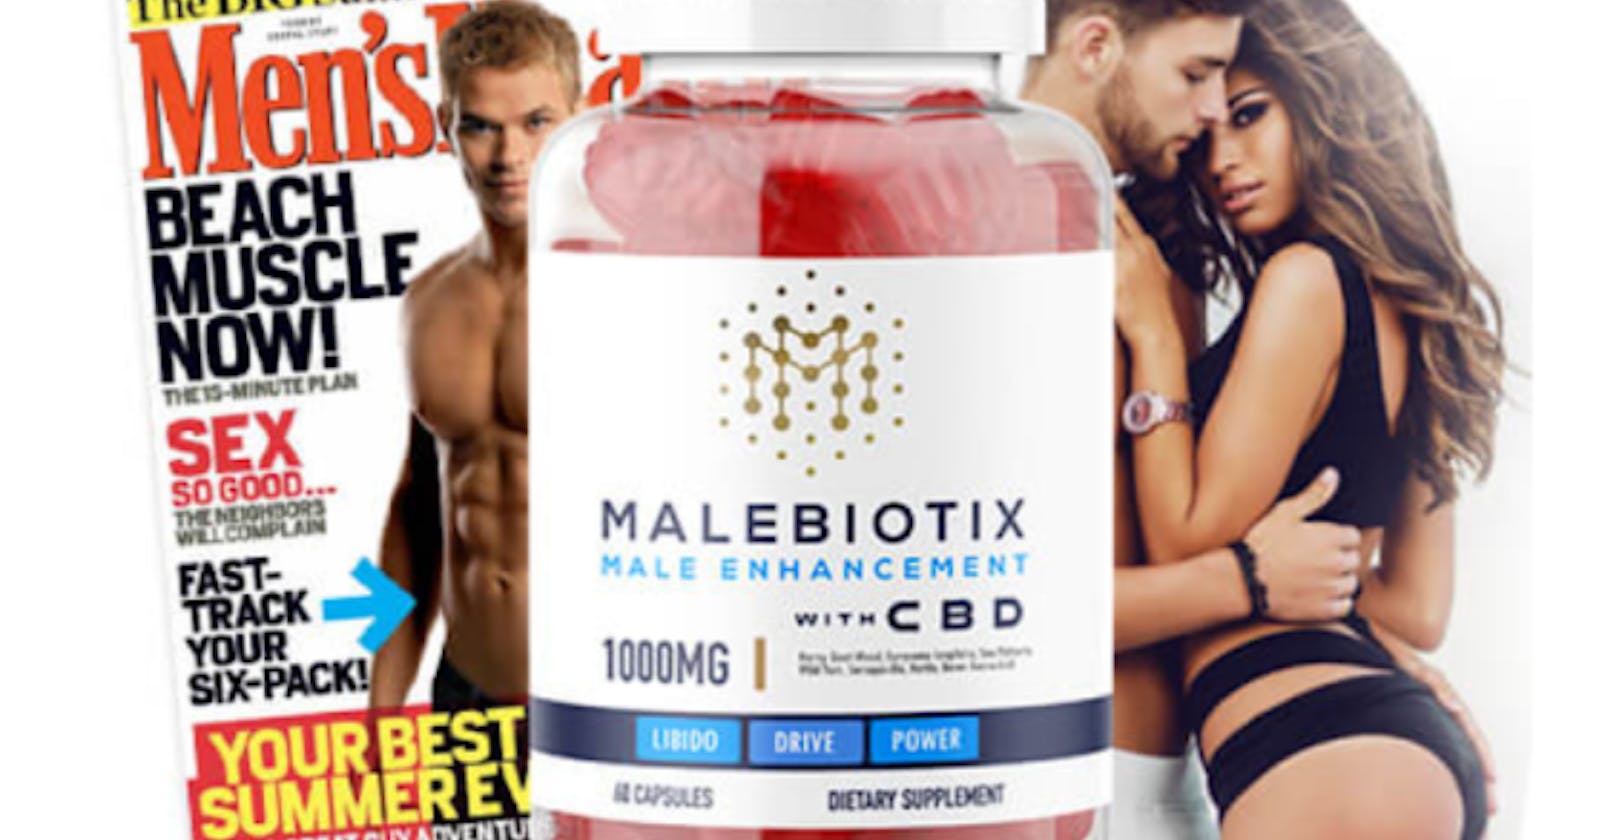 Biotix cbd Male Enhancement [Updated 2023] - How To Use & Where To Buy?